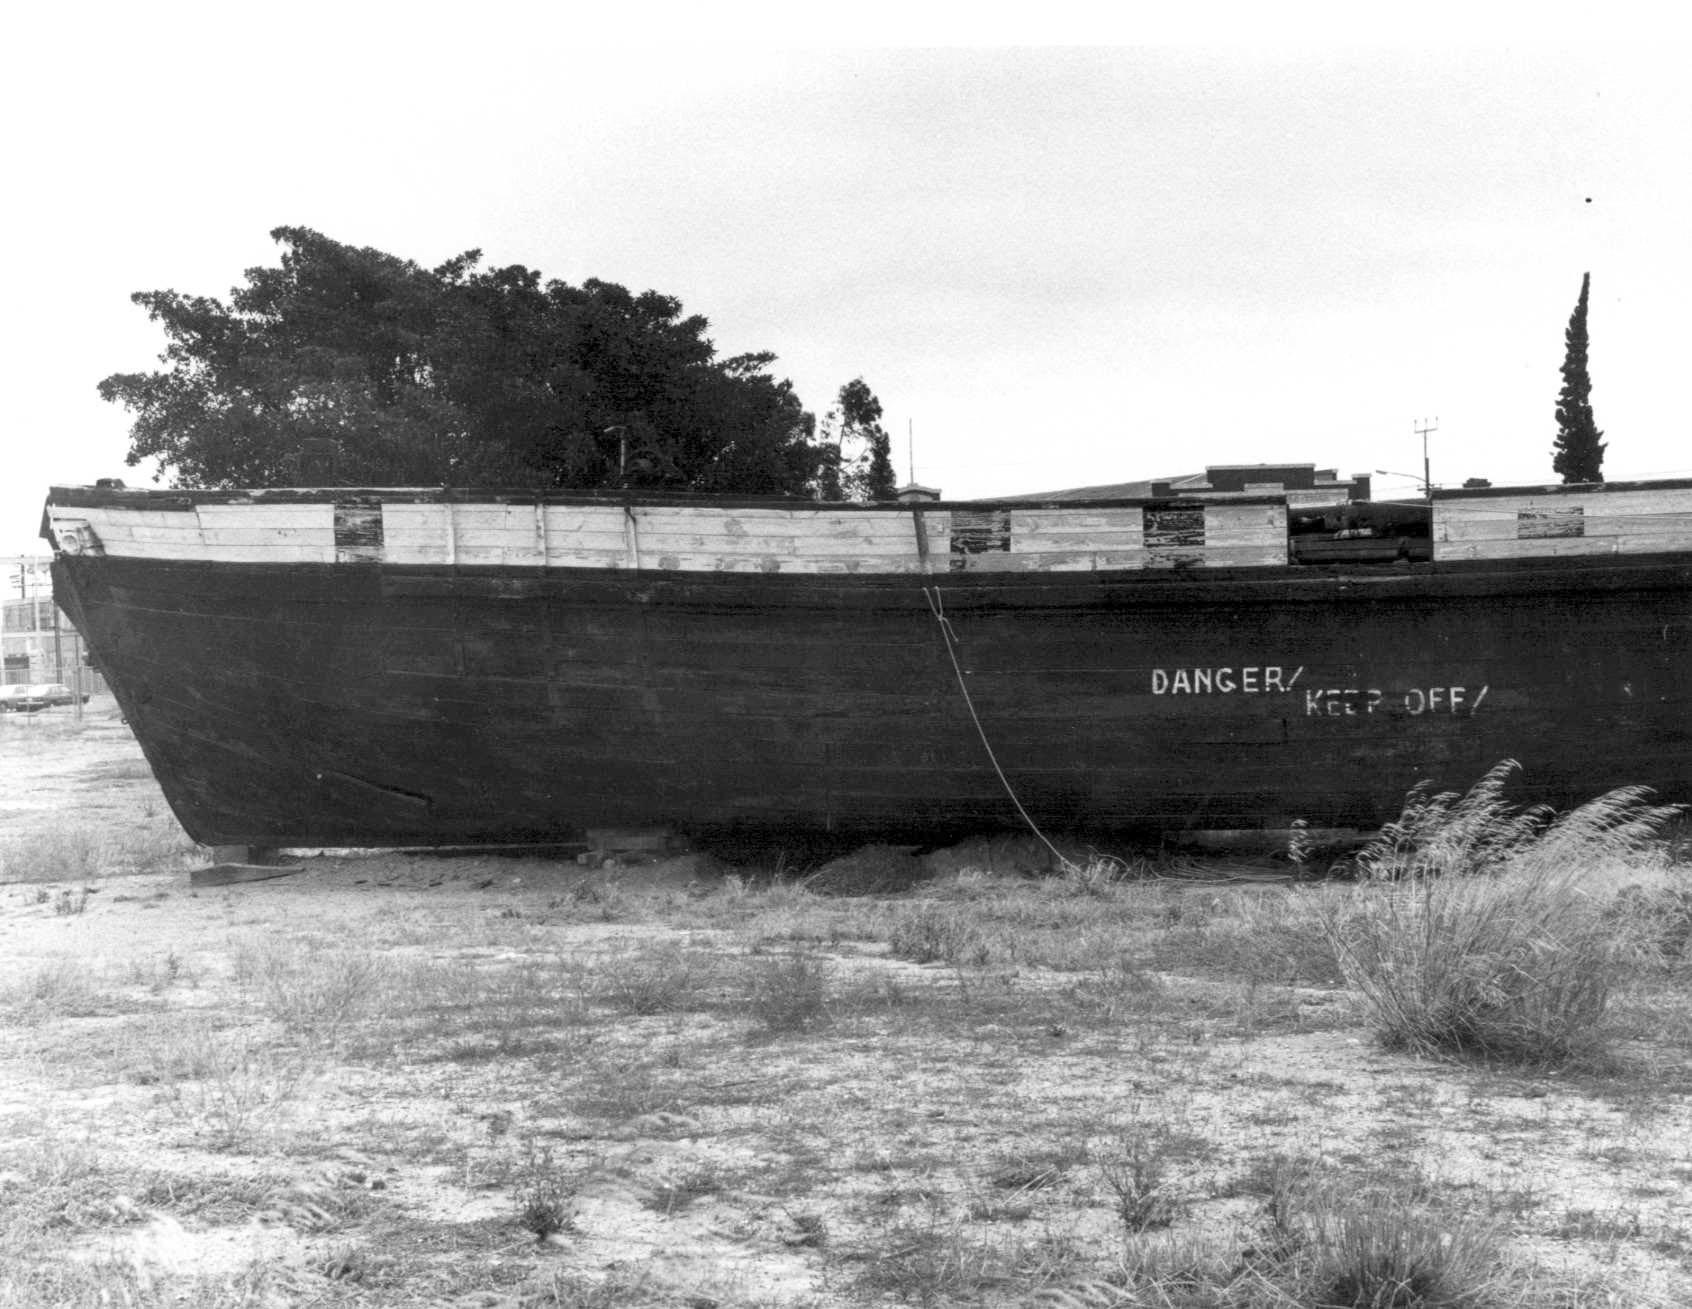 This image shows the hull of vessel on land, reading DANGER, KEEP OFF.